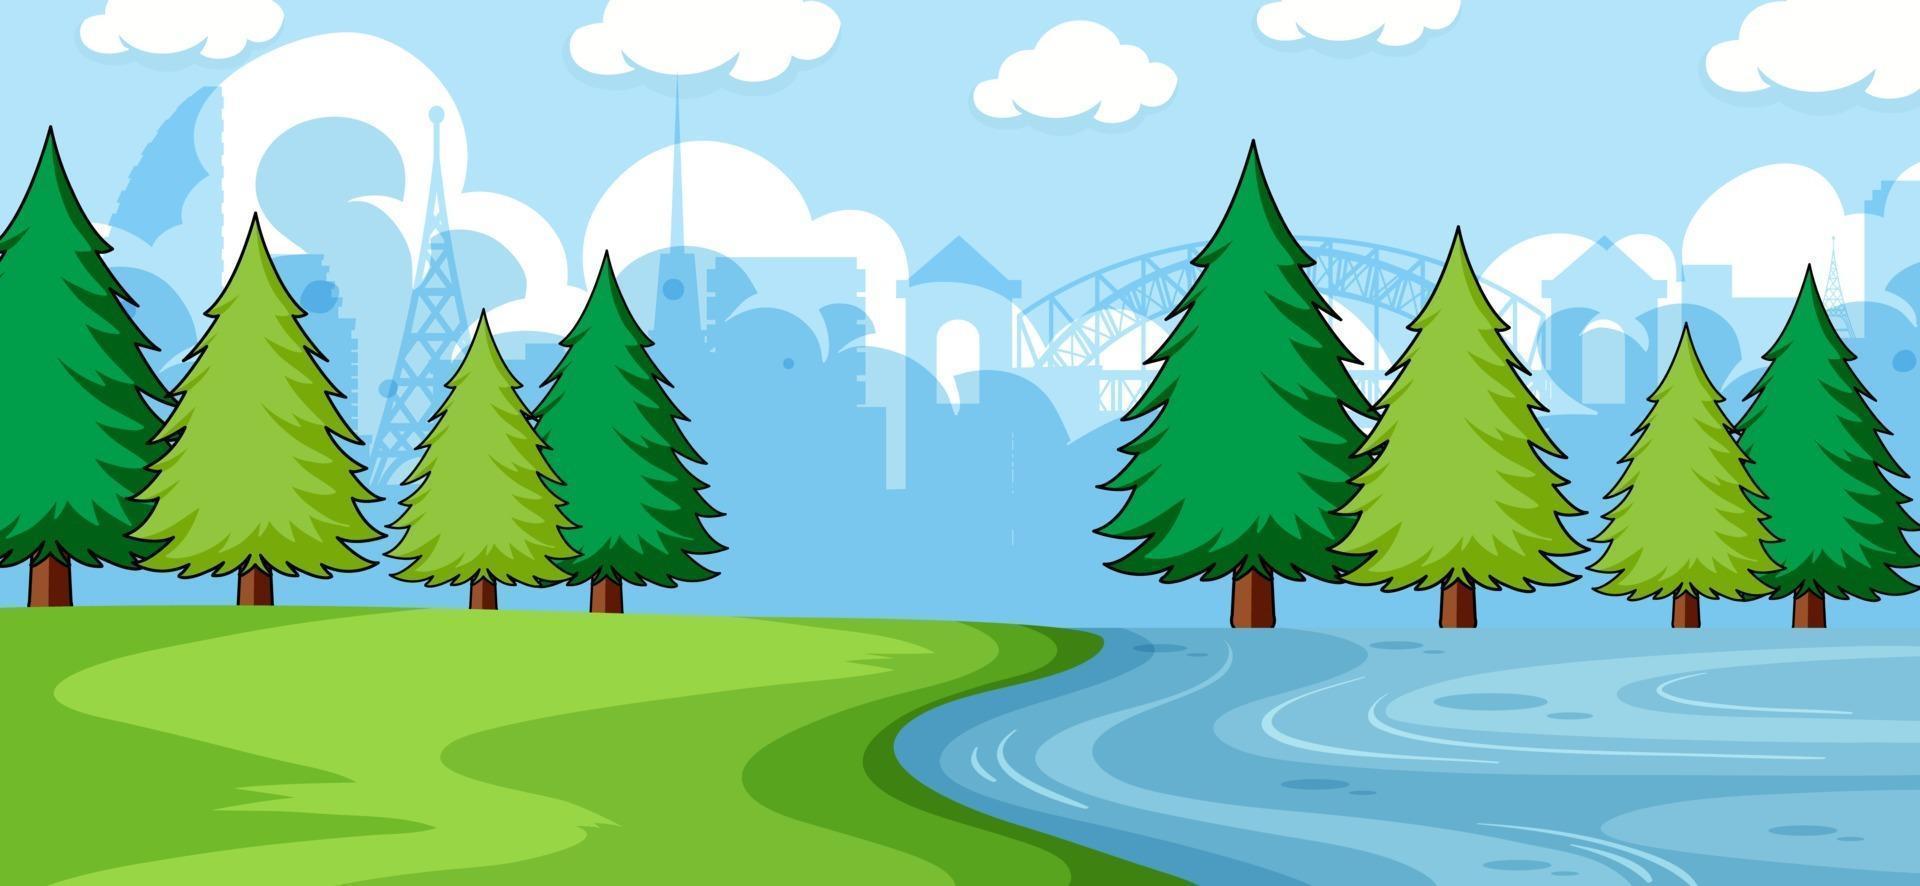 Empty park scene with river in simple style vector